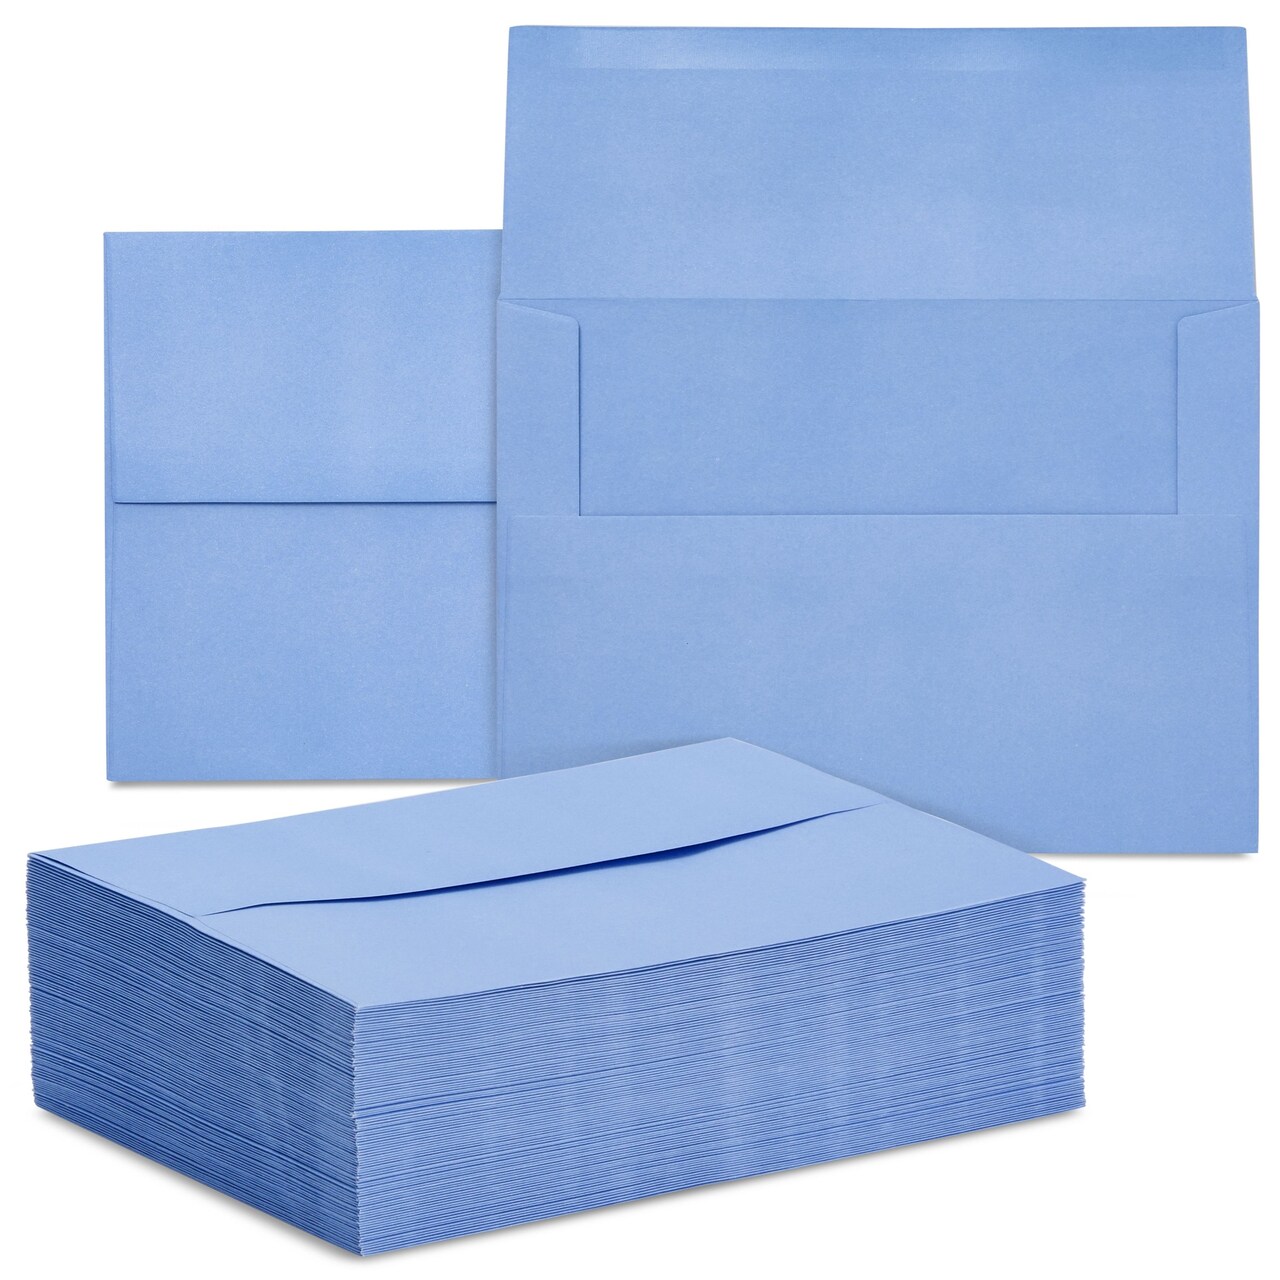 50 Pack Light Blue 5x7 Envelopes for Invitations, A7 Size for